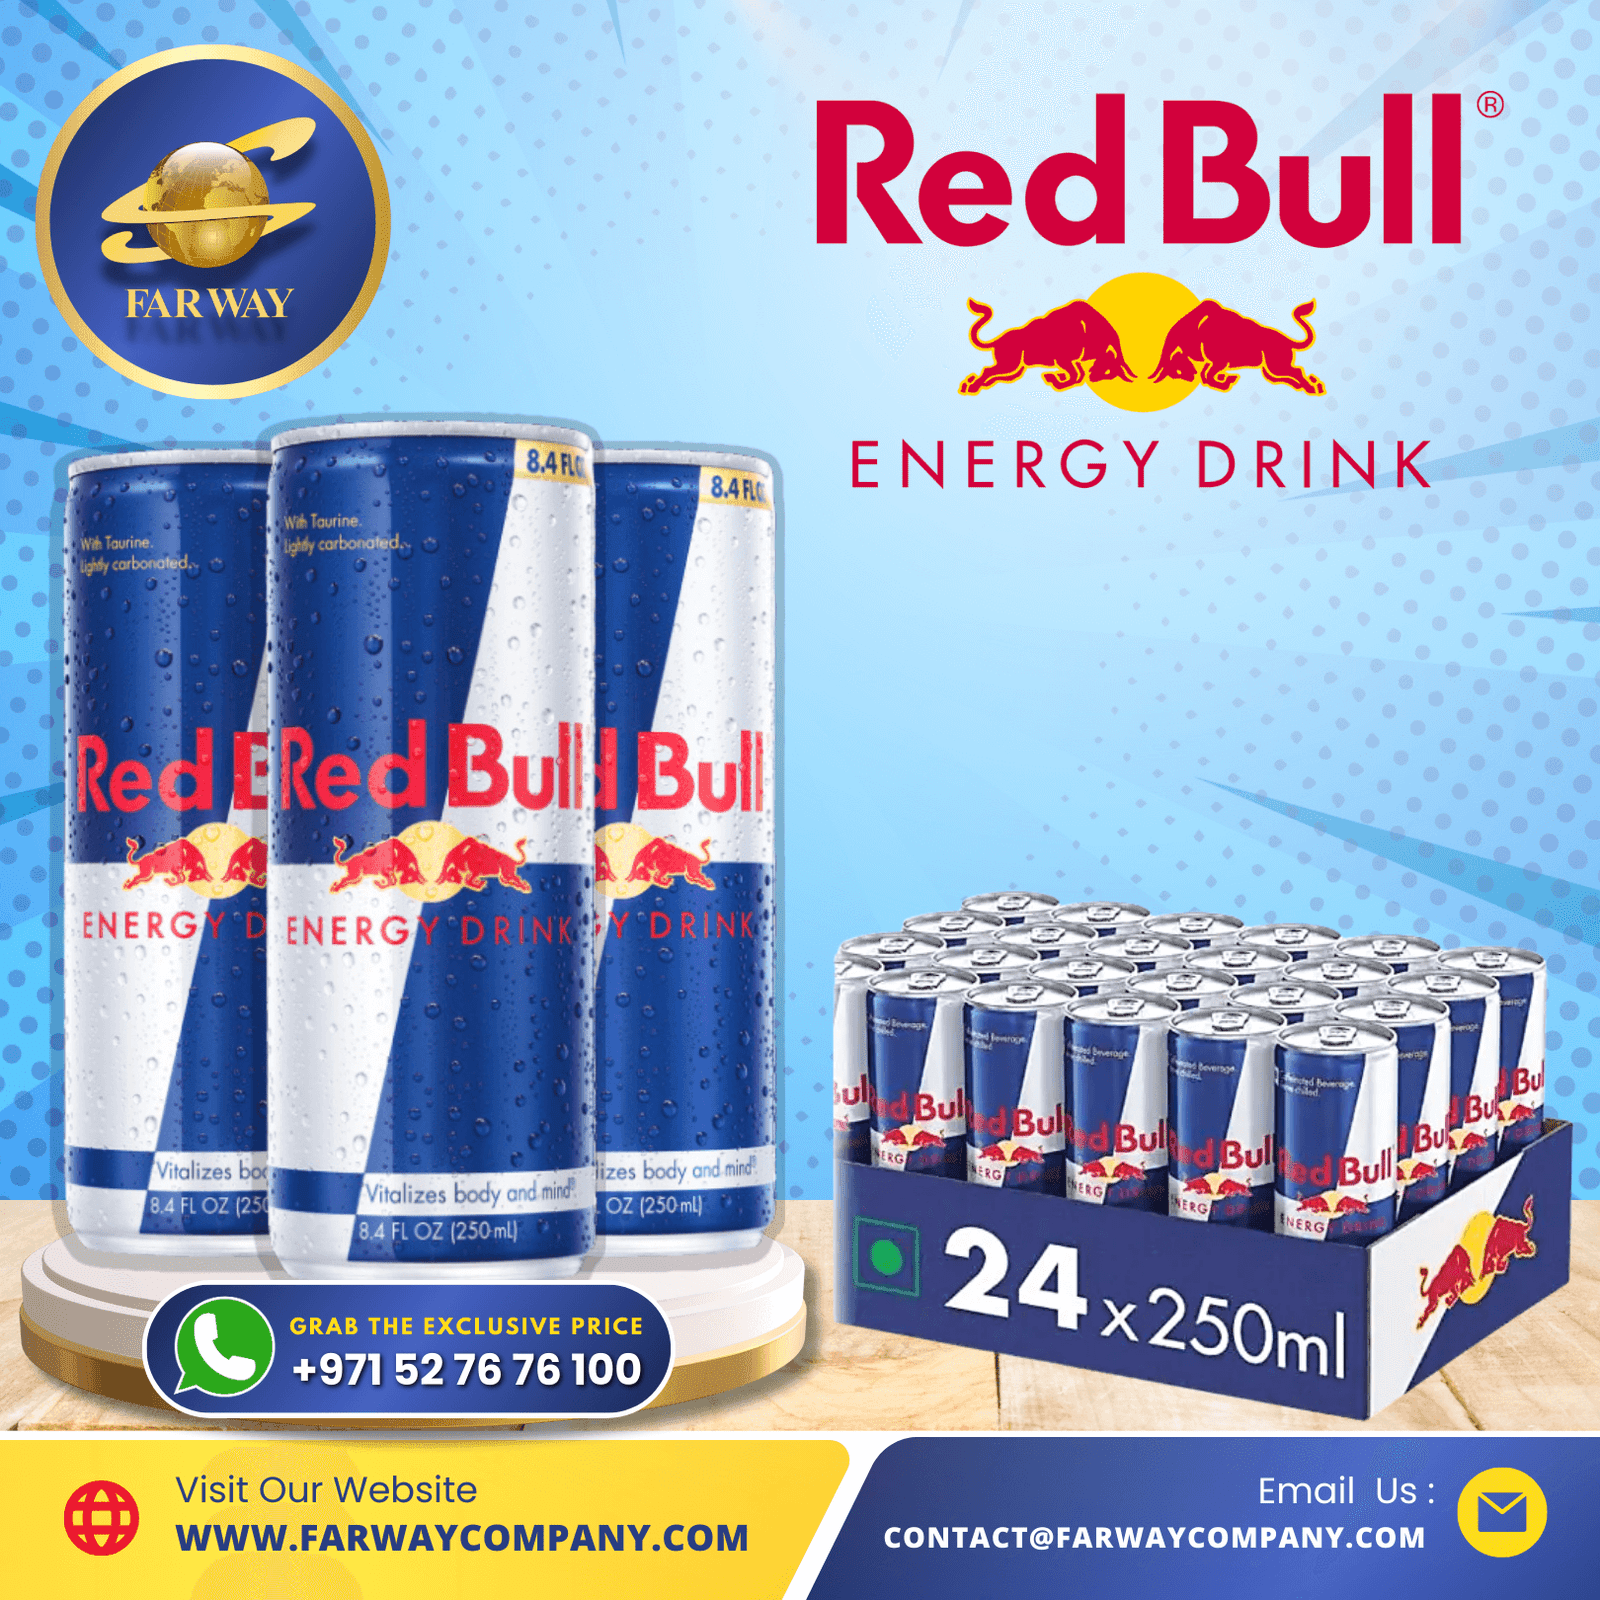 Red Bull Energy Drink Importer, Exporter & Coffee Distributor in Dubai, UAE, Middle East